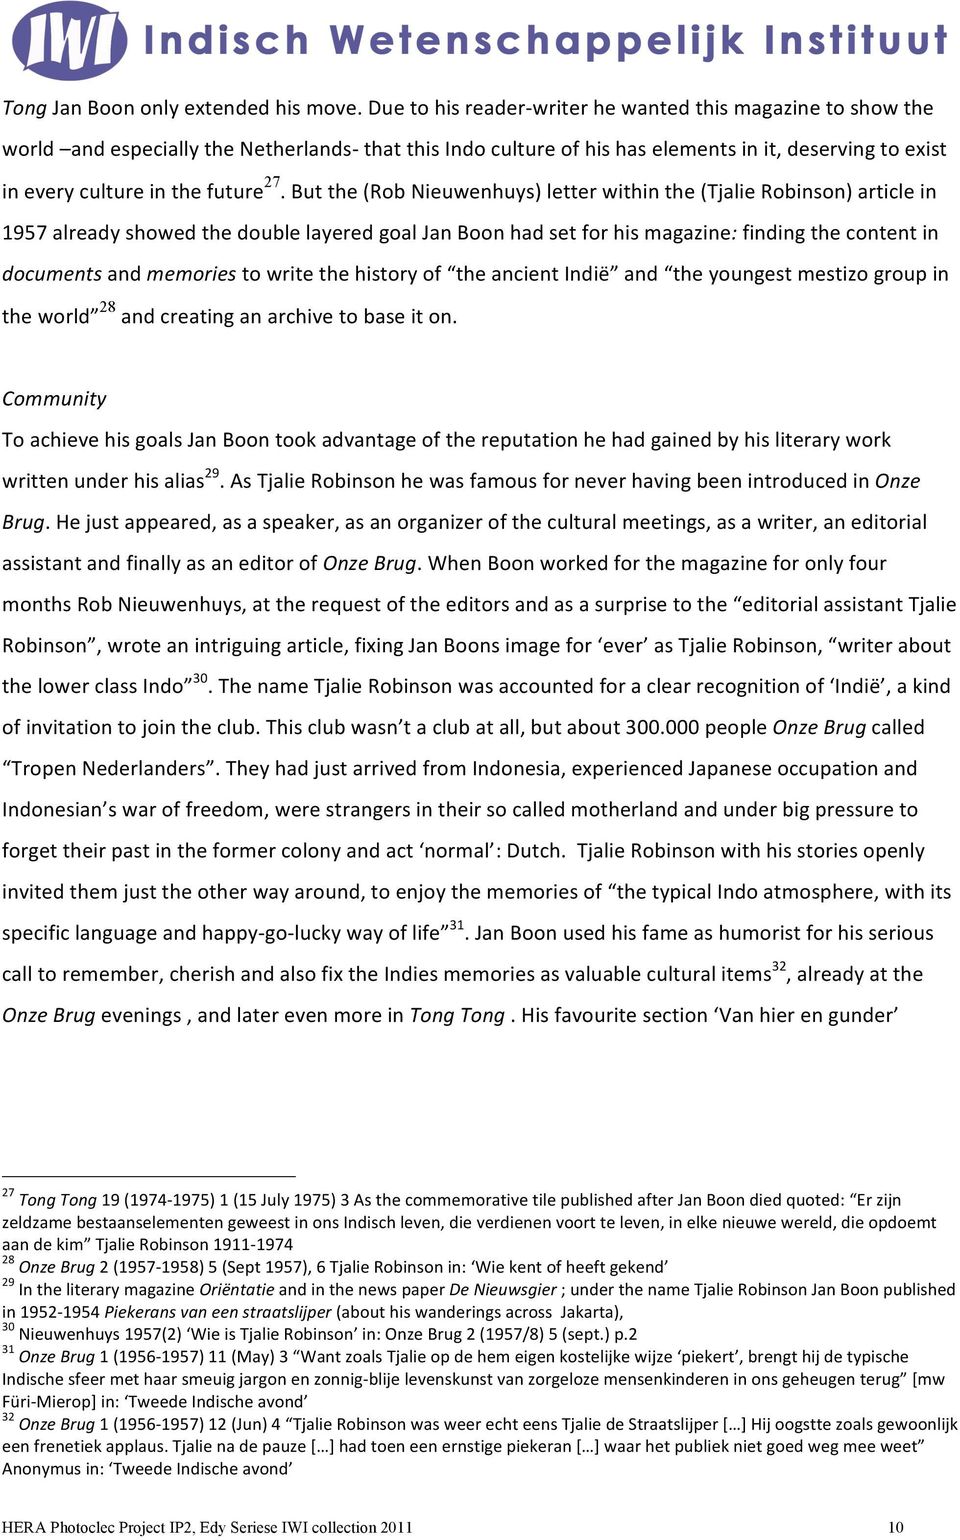 27. But the (Rob Nieuwenhuys) letter within the (Tjalie Robinson) article in 1957 already showed the double layered goal Jan Boon had set for his magazine: finding the content in documents and